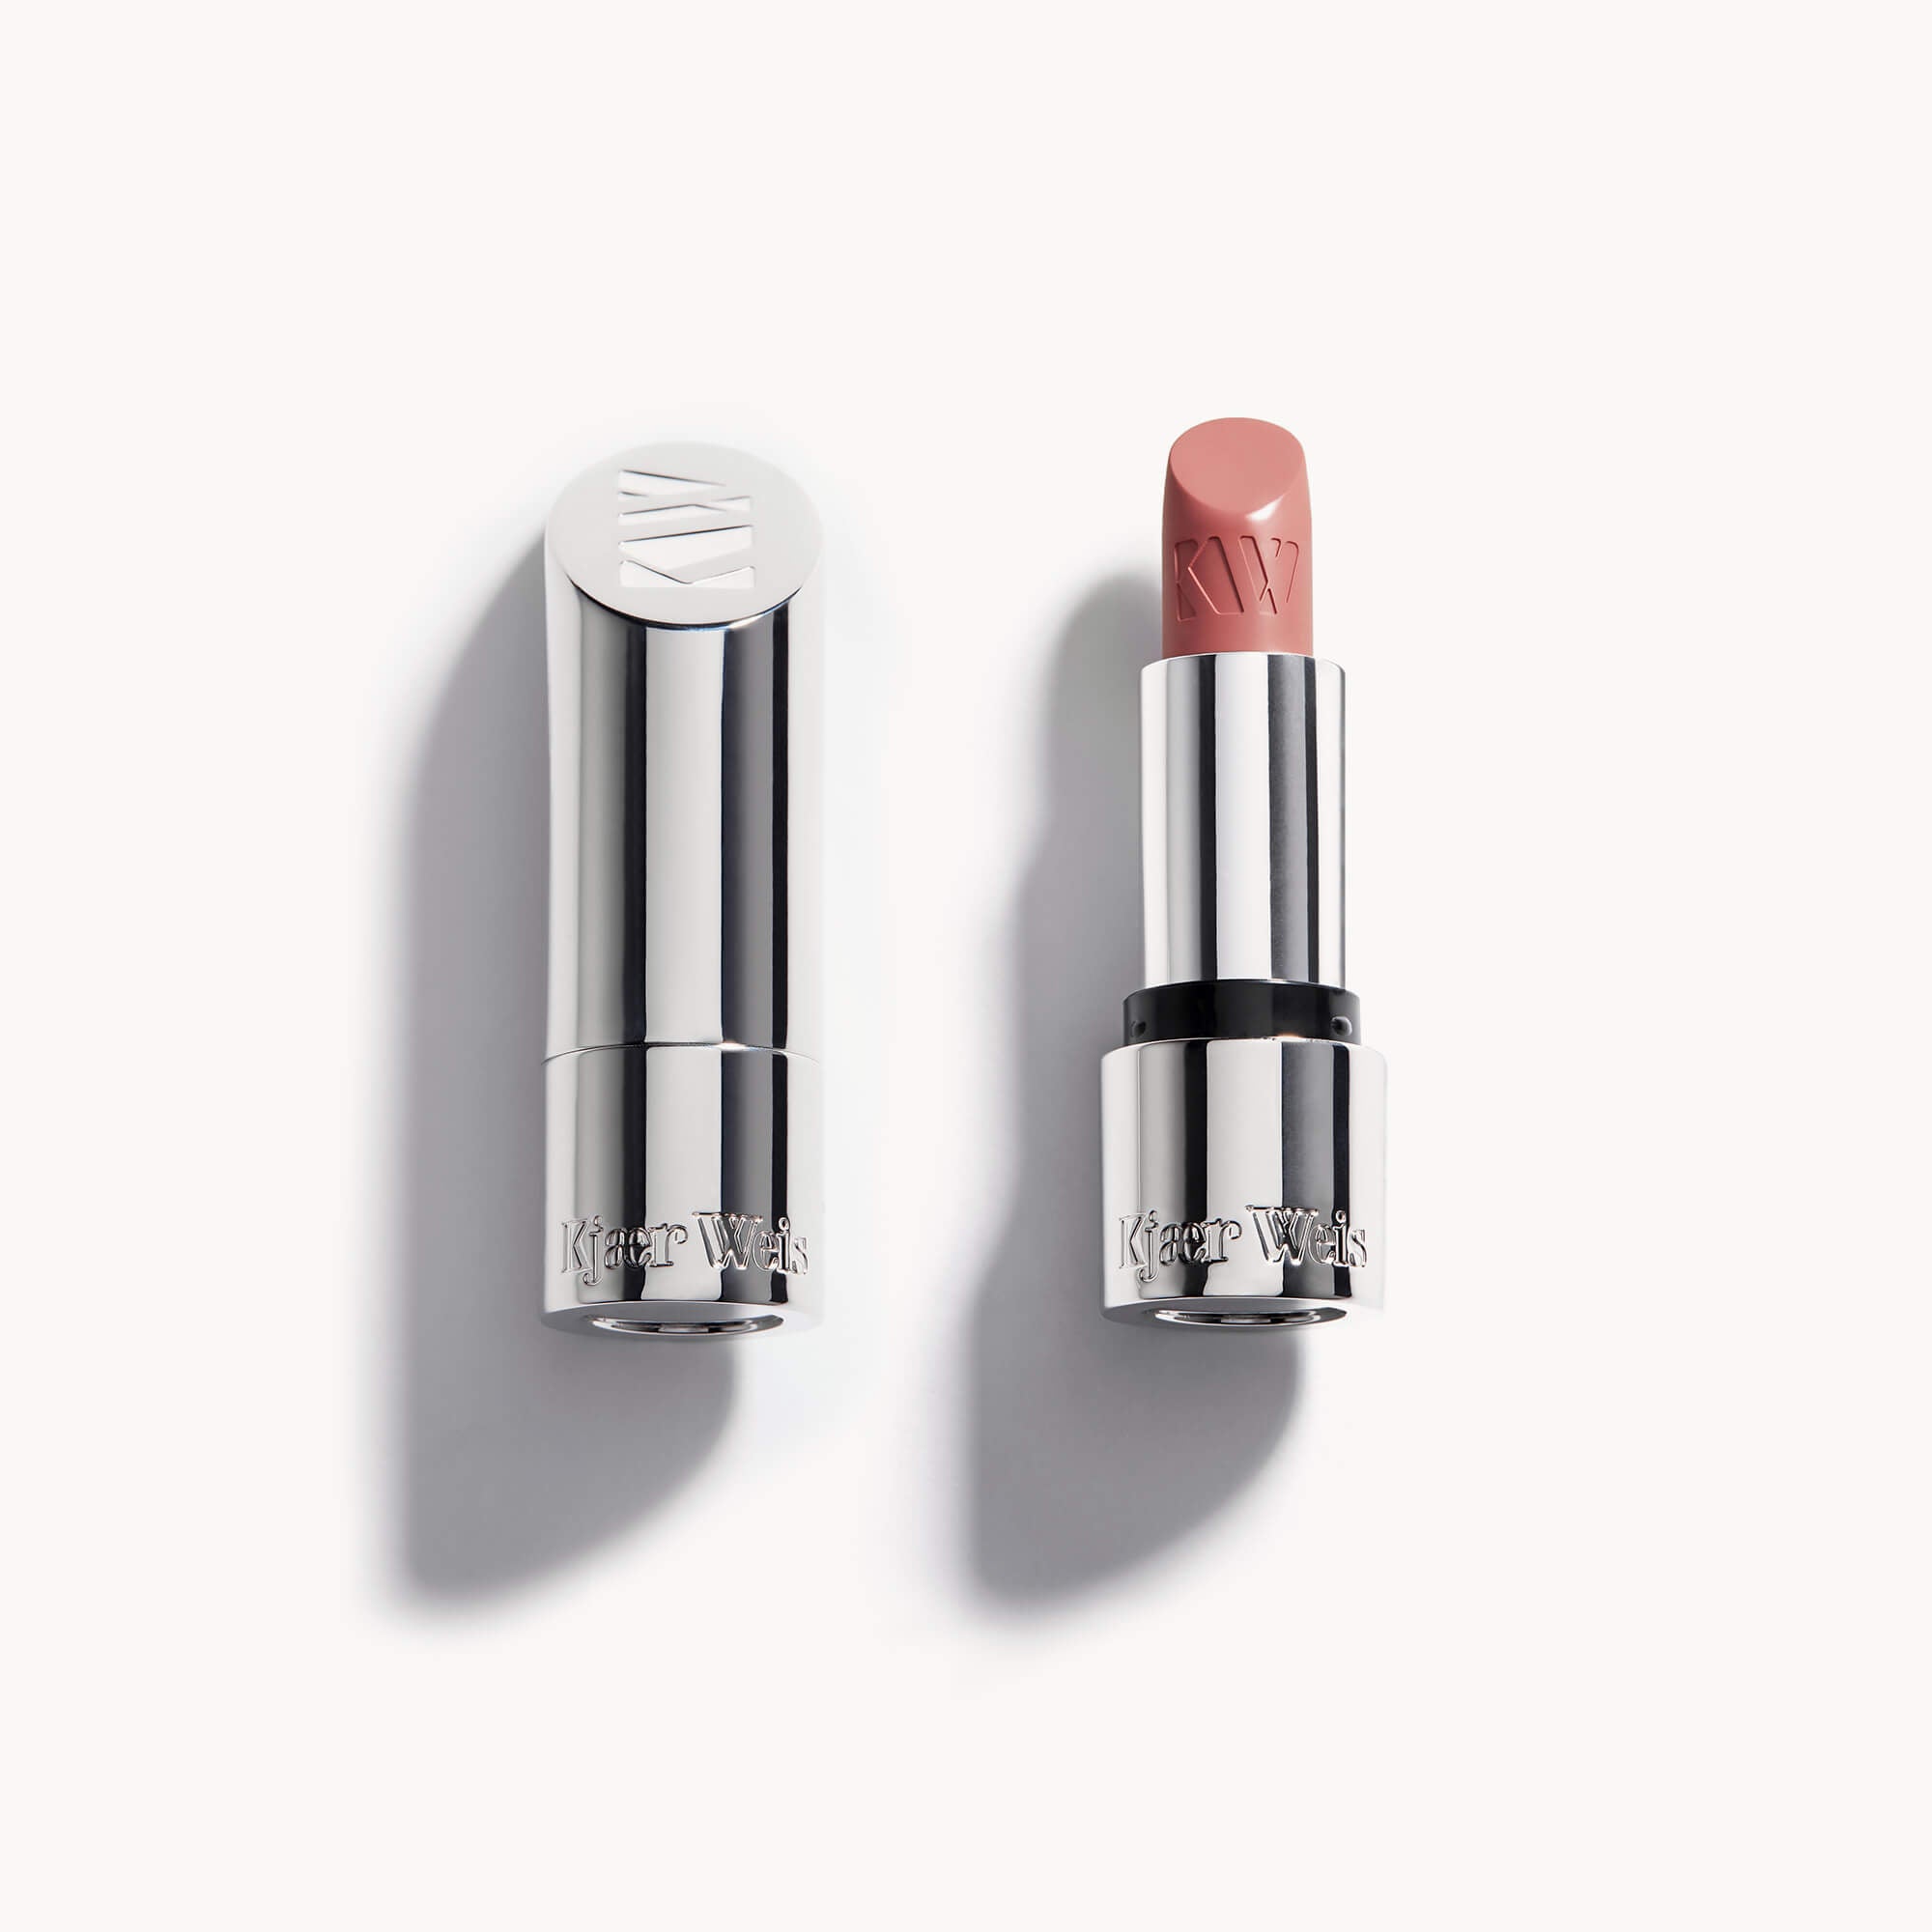 http://die-frau.com/upload/Nude-Naturally-Lipstick-Iconic-Gracious-Shopify.jpg